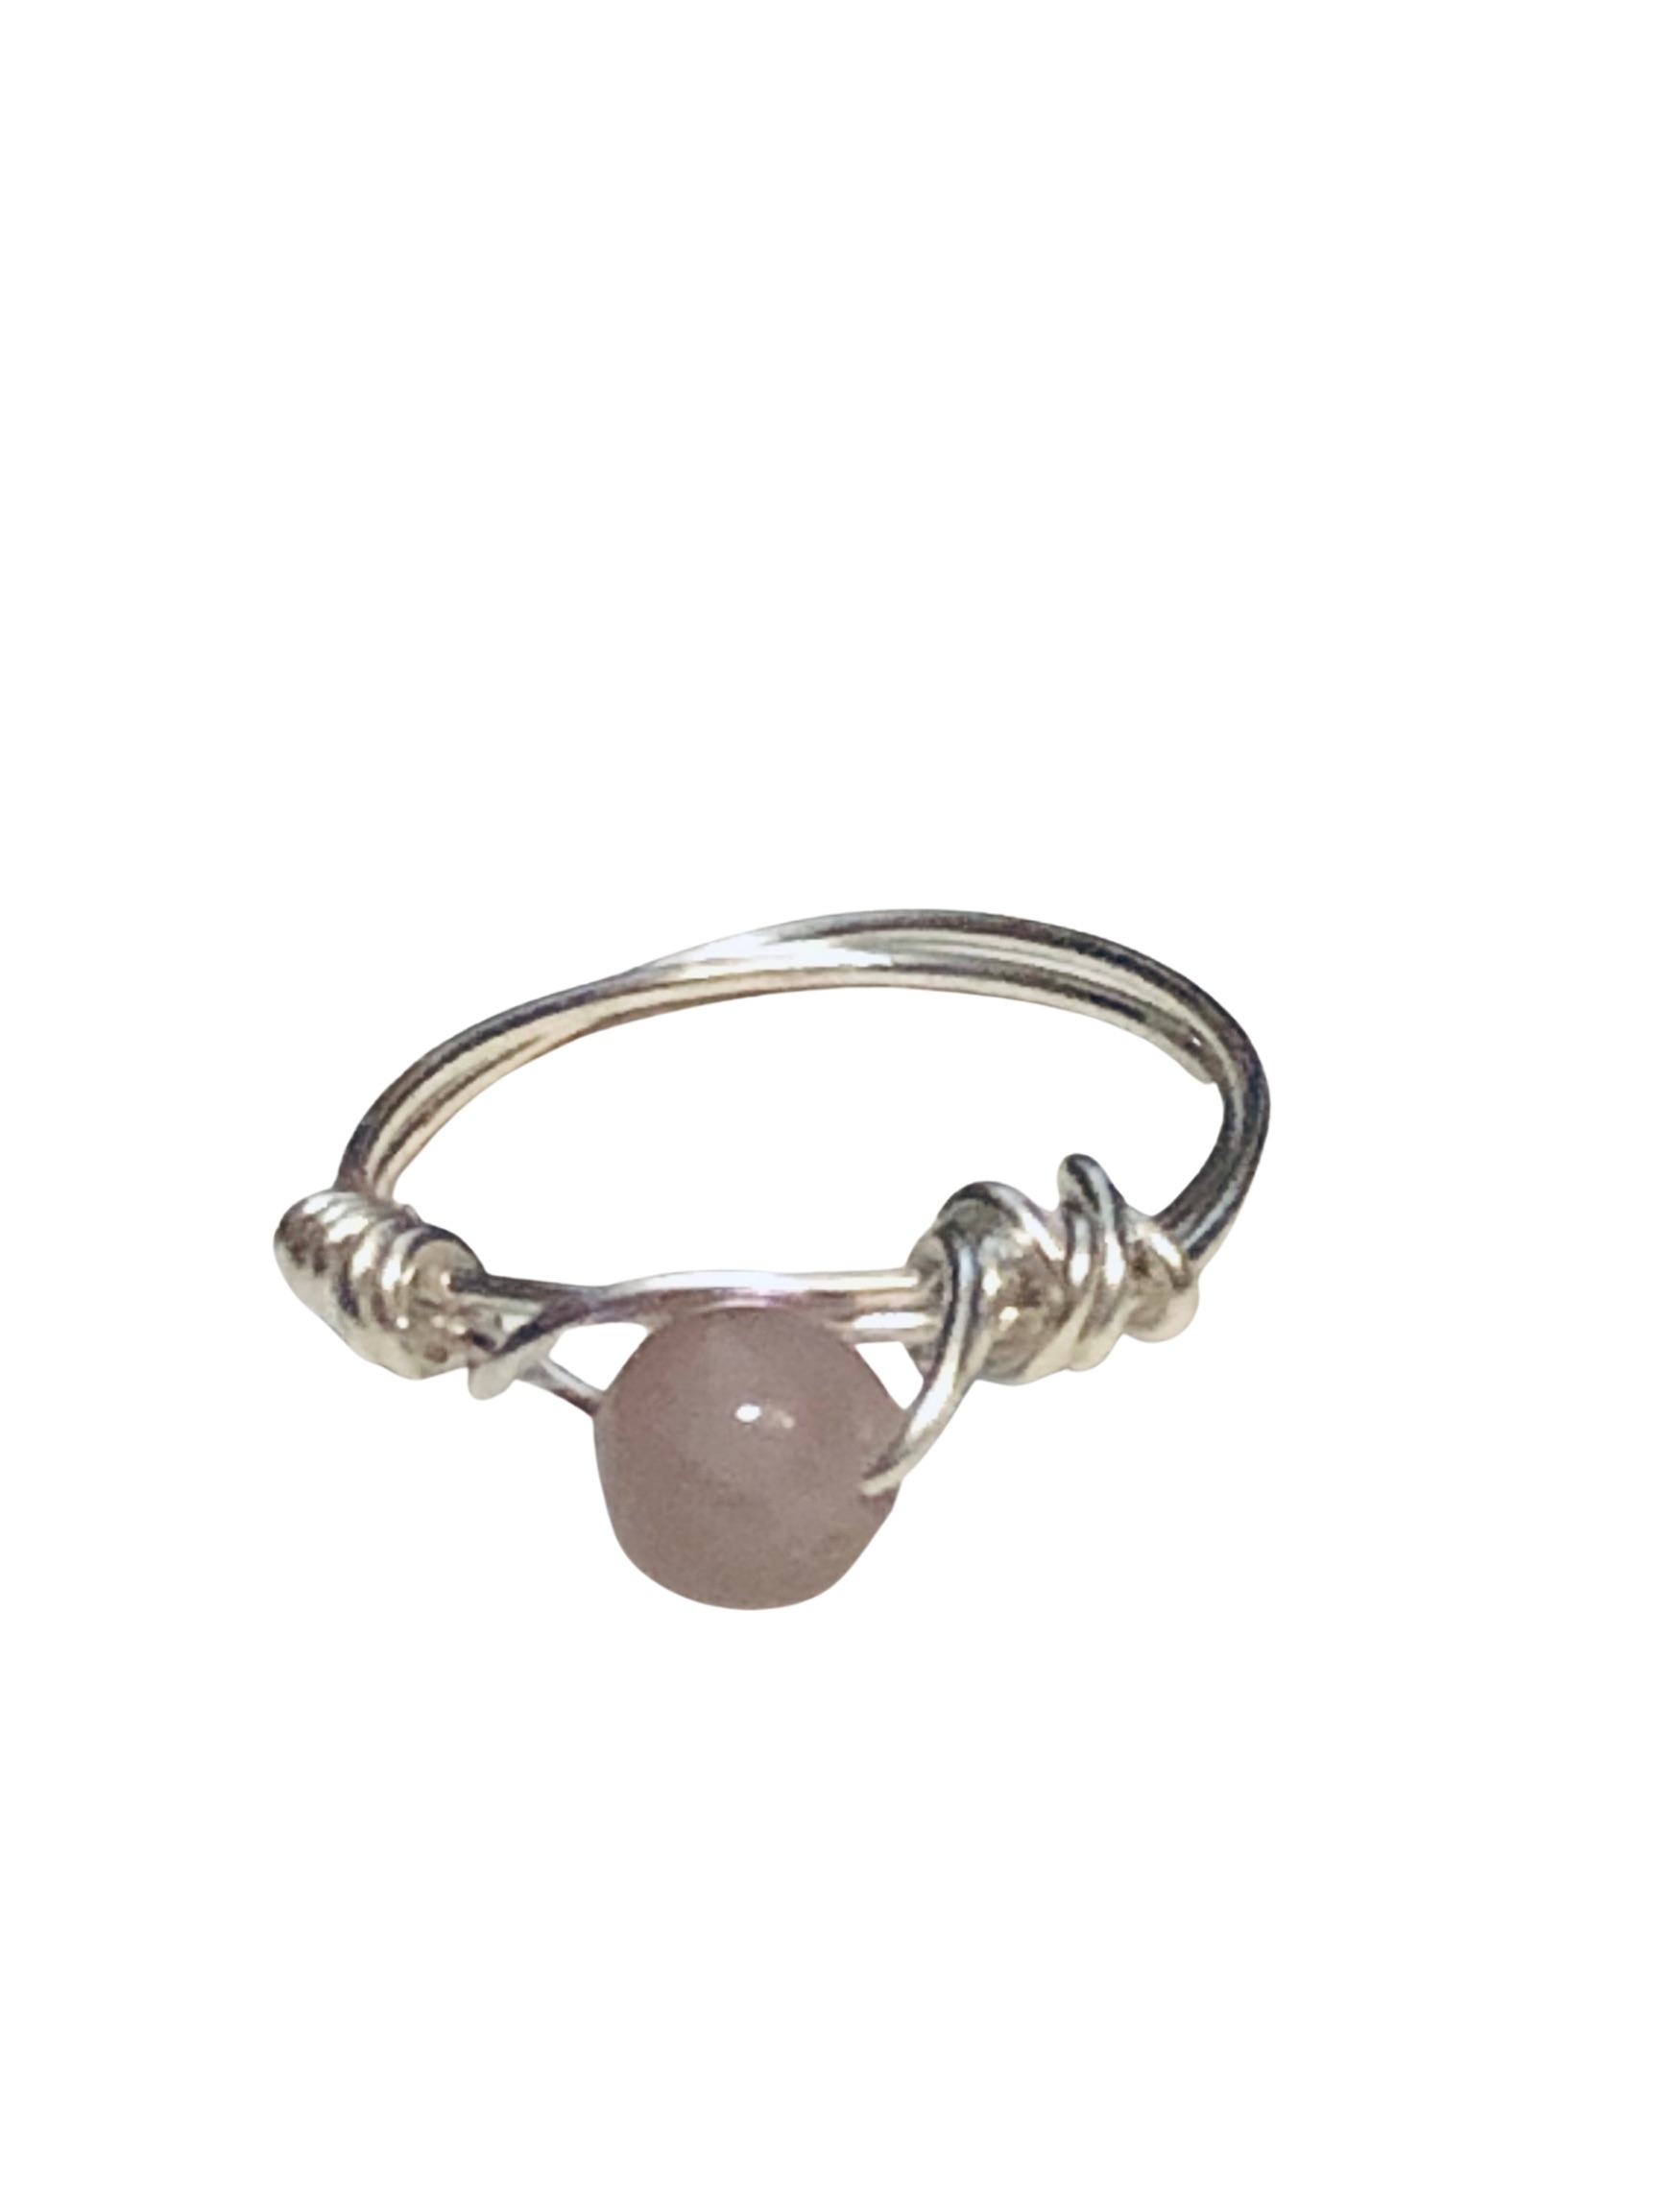 Rose Quartz Wire Wrapped Ring 925 Silver Handmade ANY SIZE 